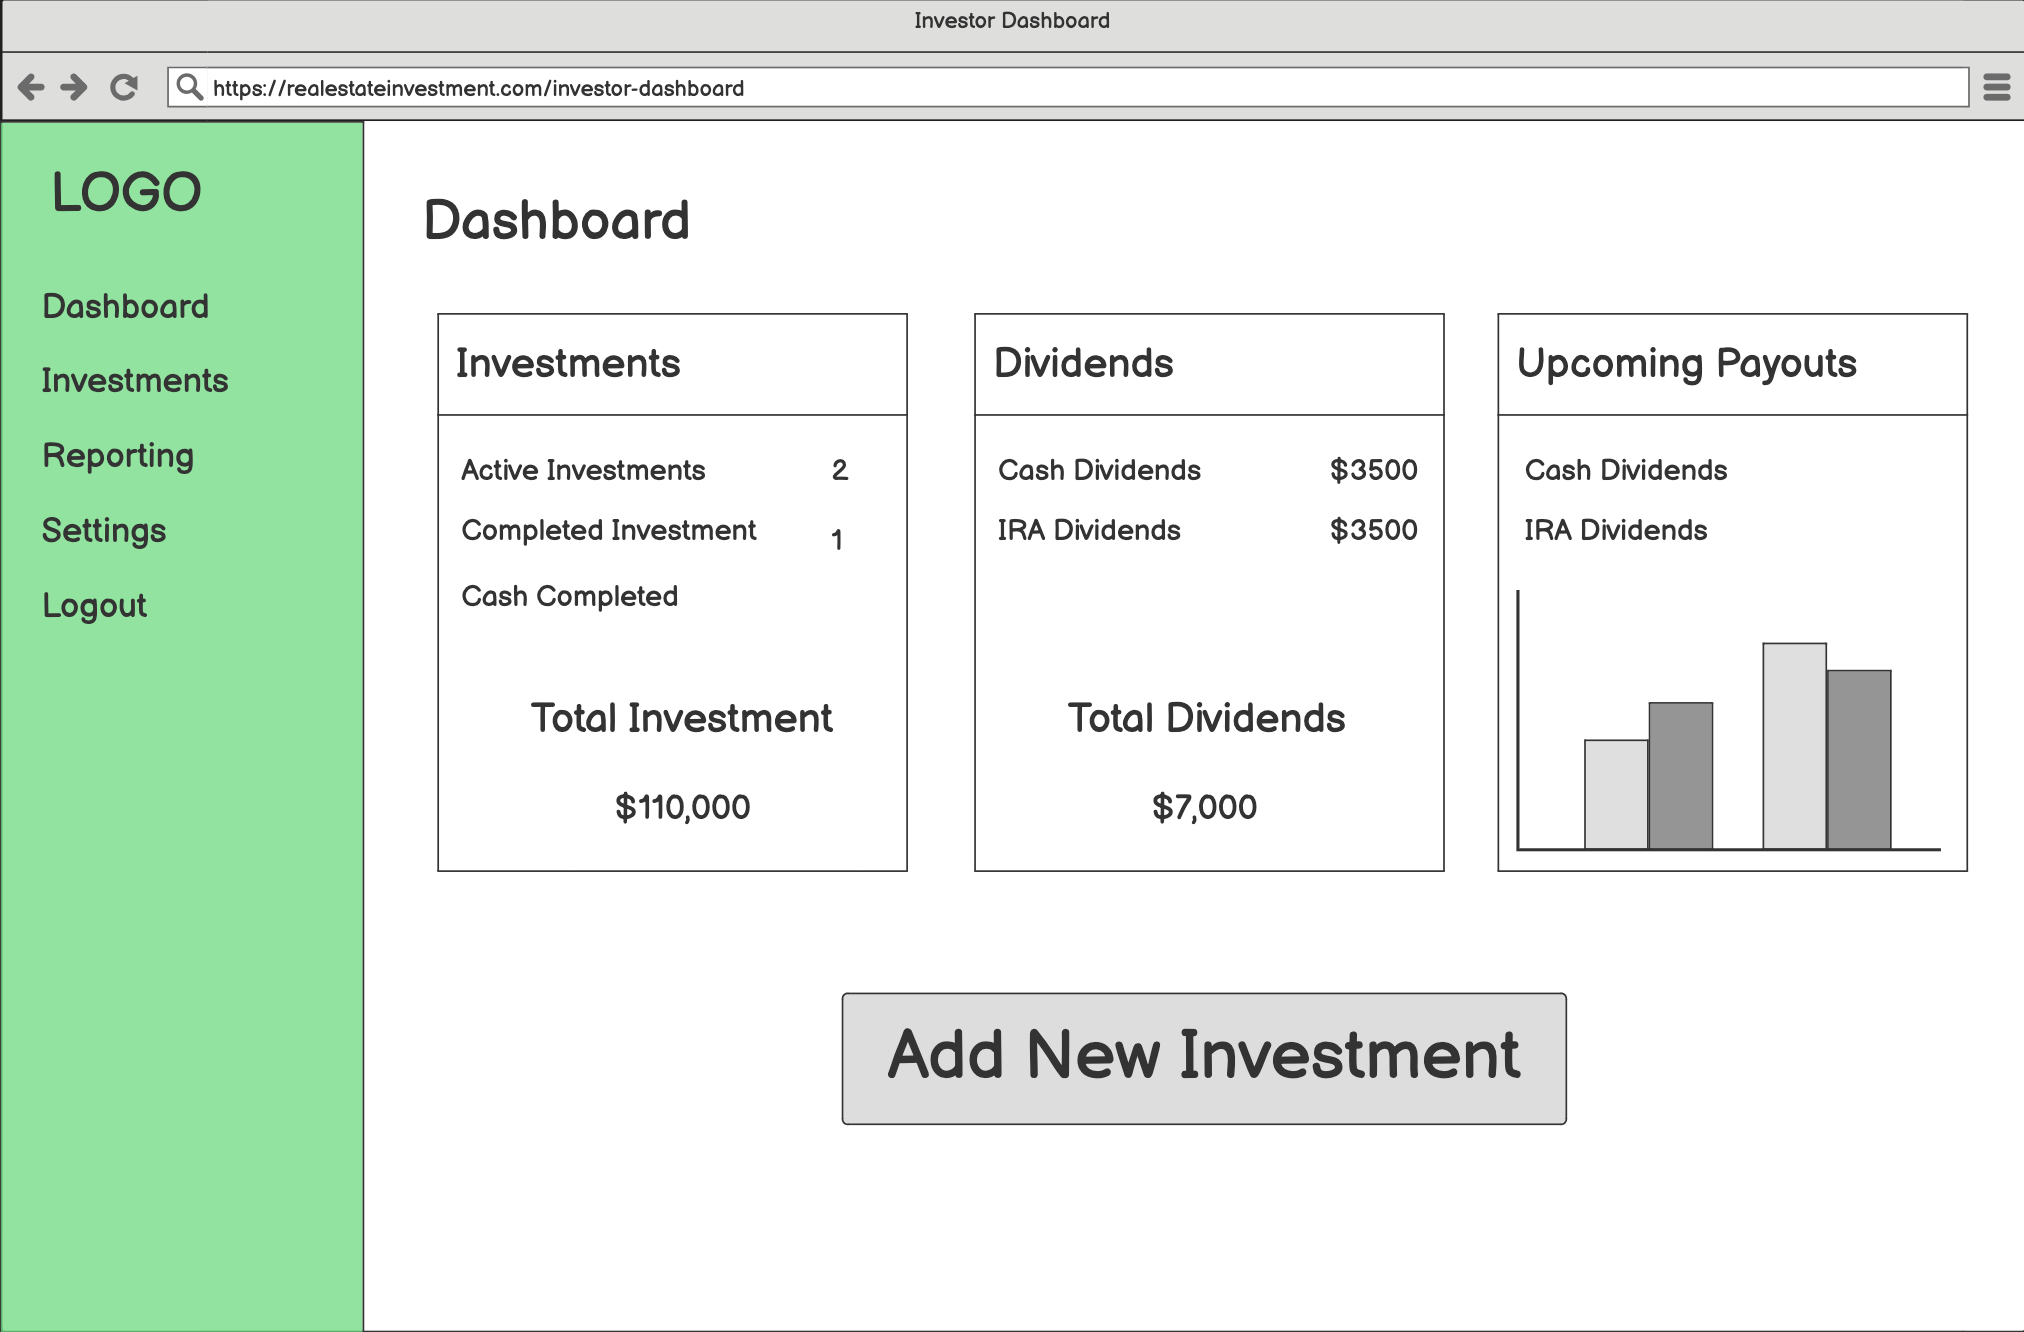 Private equity investor dashboard